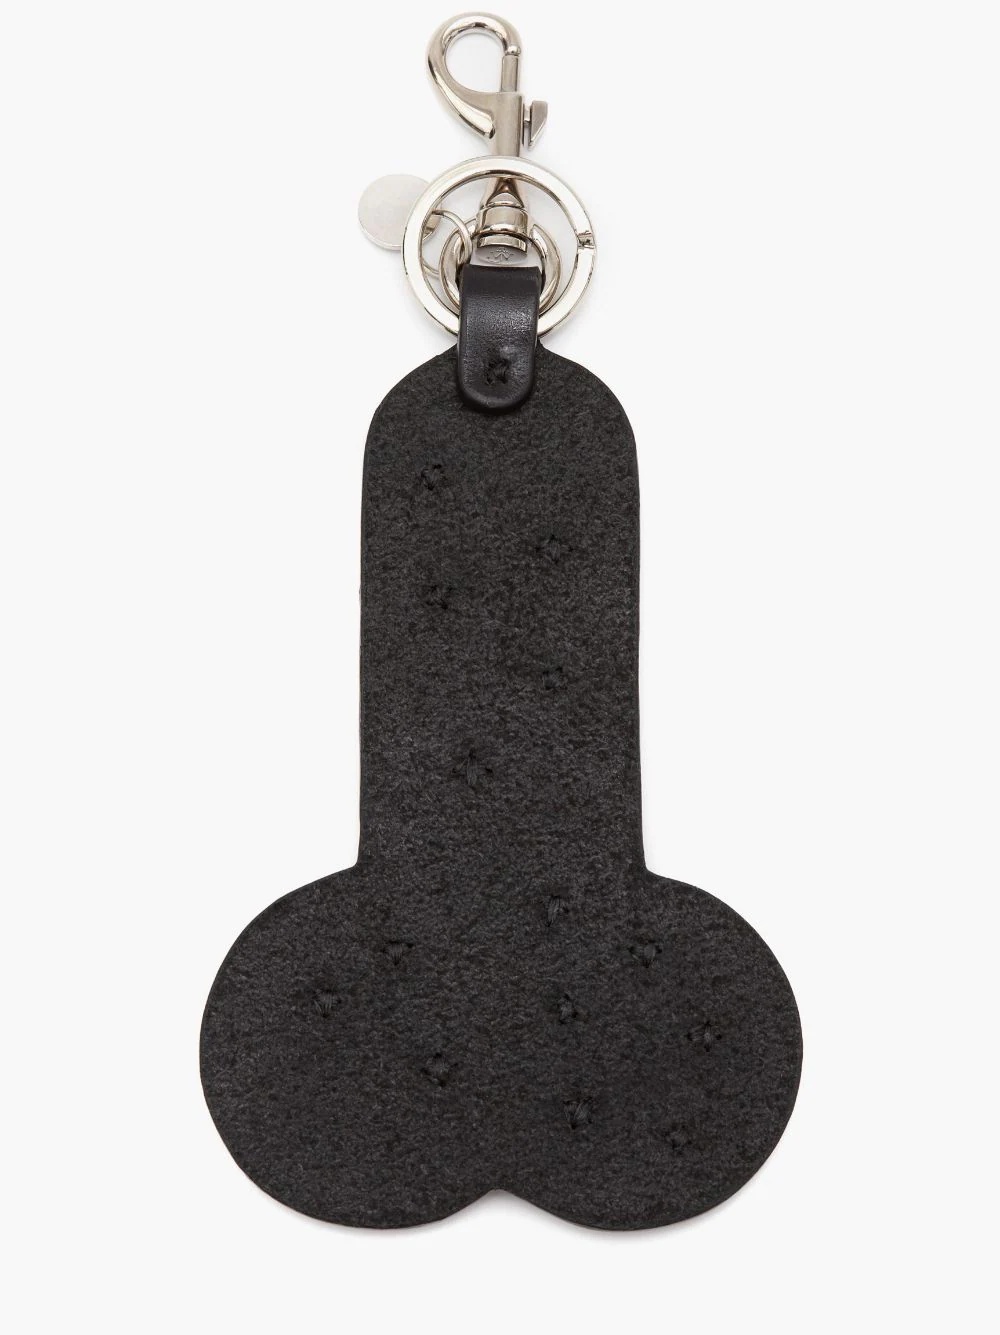 MADE IN BRITAIN: BUTTON-EMBELLISHED PENIS KEYRING - 4